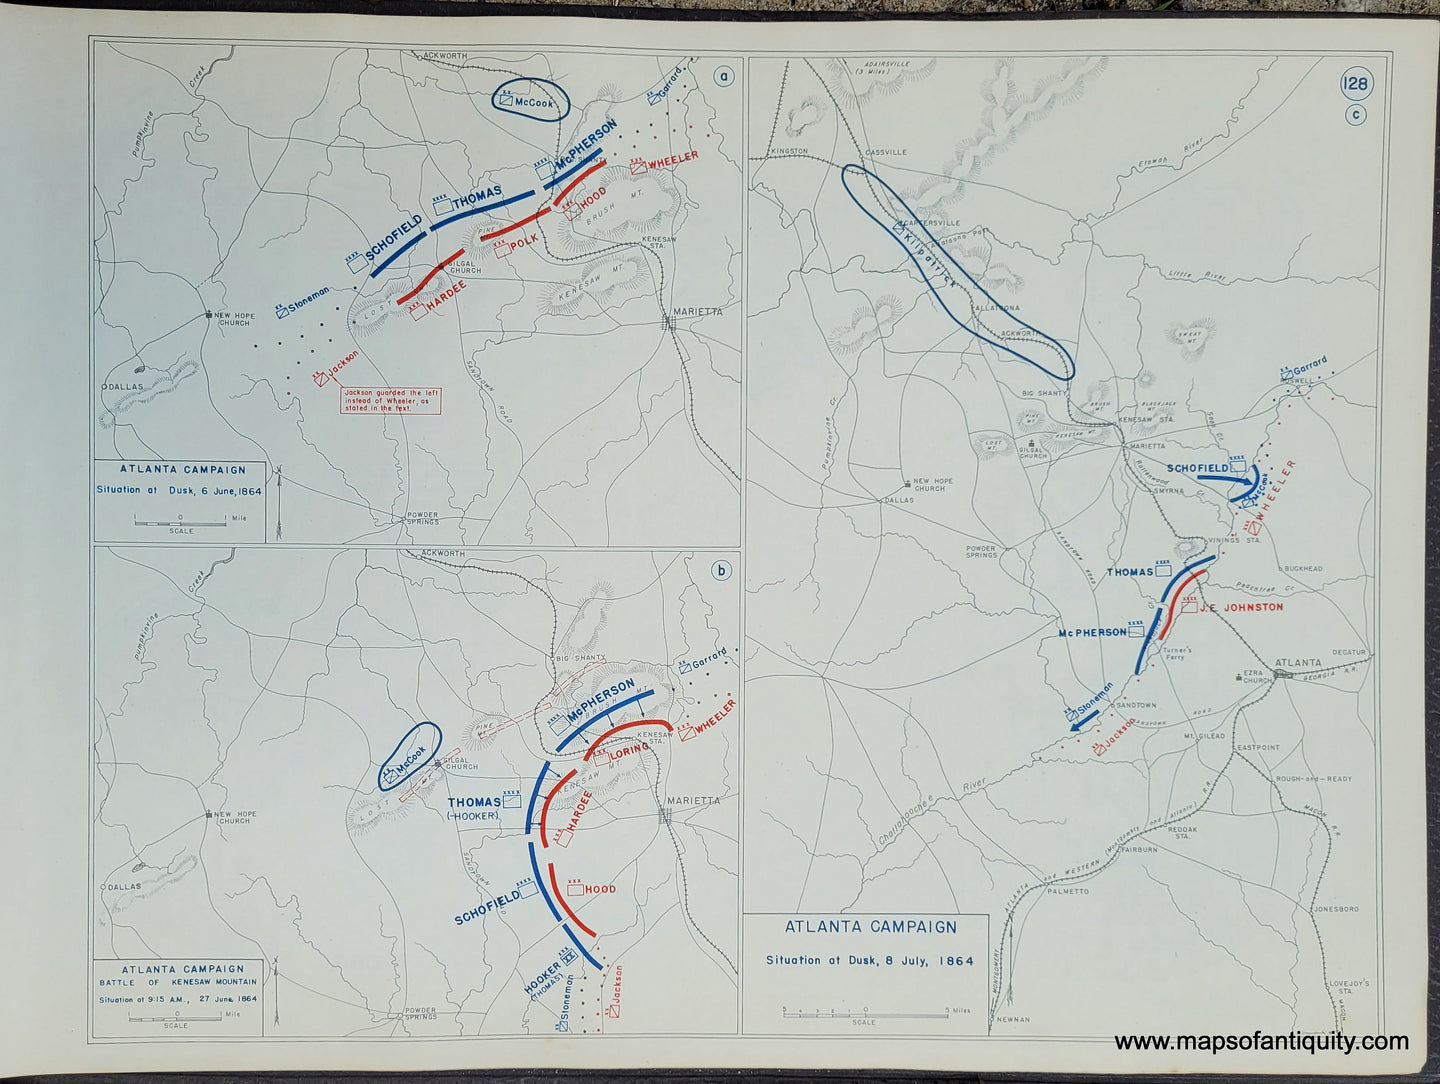 Genuine-Antique-Map-Atlanta-Campaign-Situation-at-Dusck-6-June-1864-Battle-of-Kenesaw-Mountain-Situation-at-Dusk-8-July-1864-1948-Matthew-Forney-Steele-Dept-of-Military-Art-and-Engineering-US-Military-Academy-West-Point-Maps-Of-Antiquity